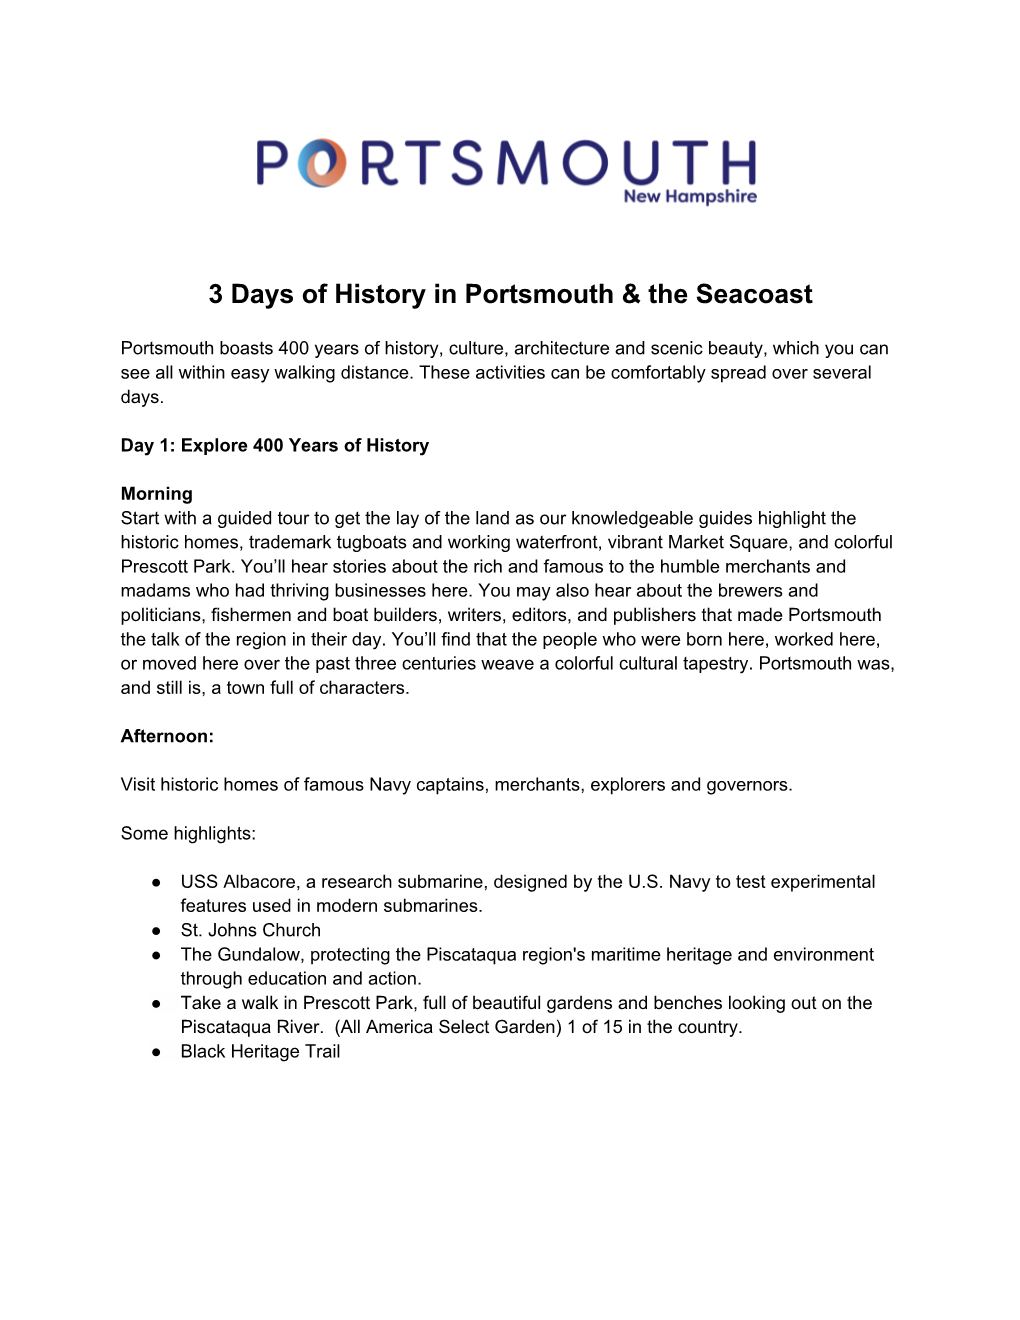 3 Days of History in Portsmouth & the Seacoast